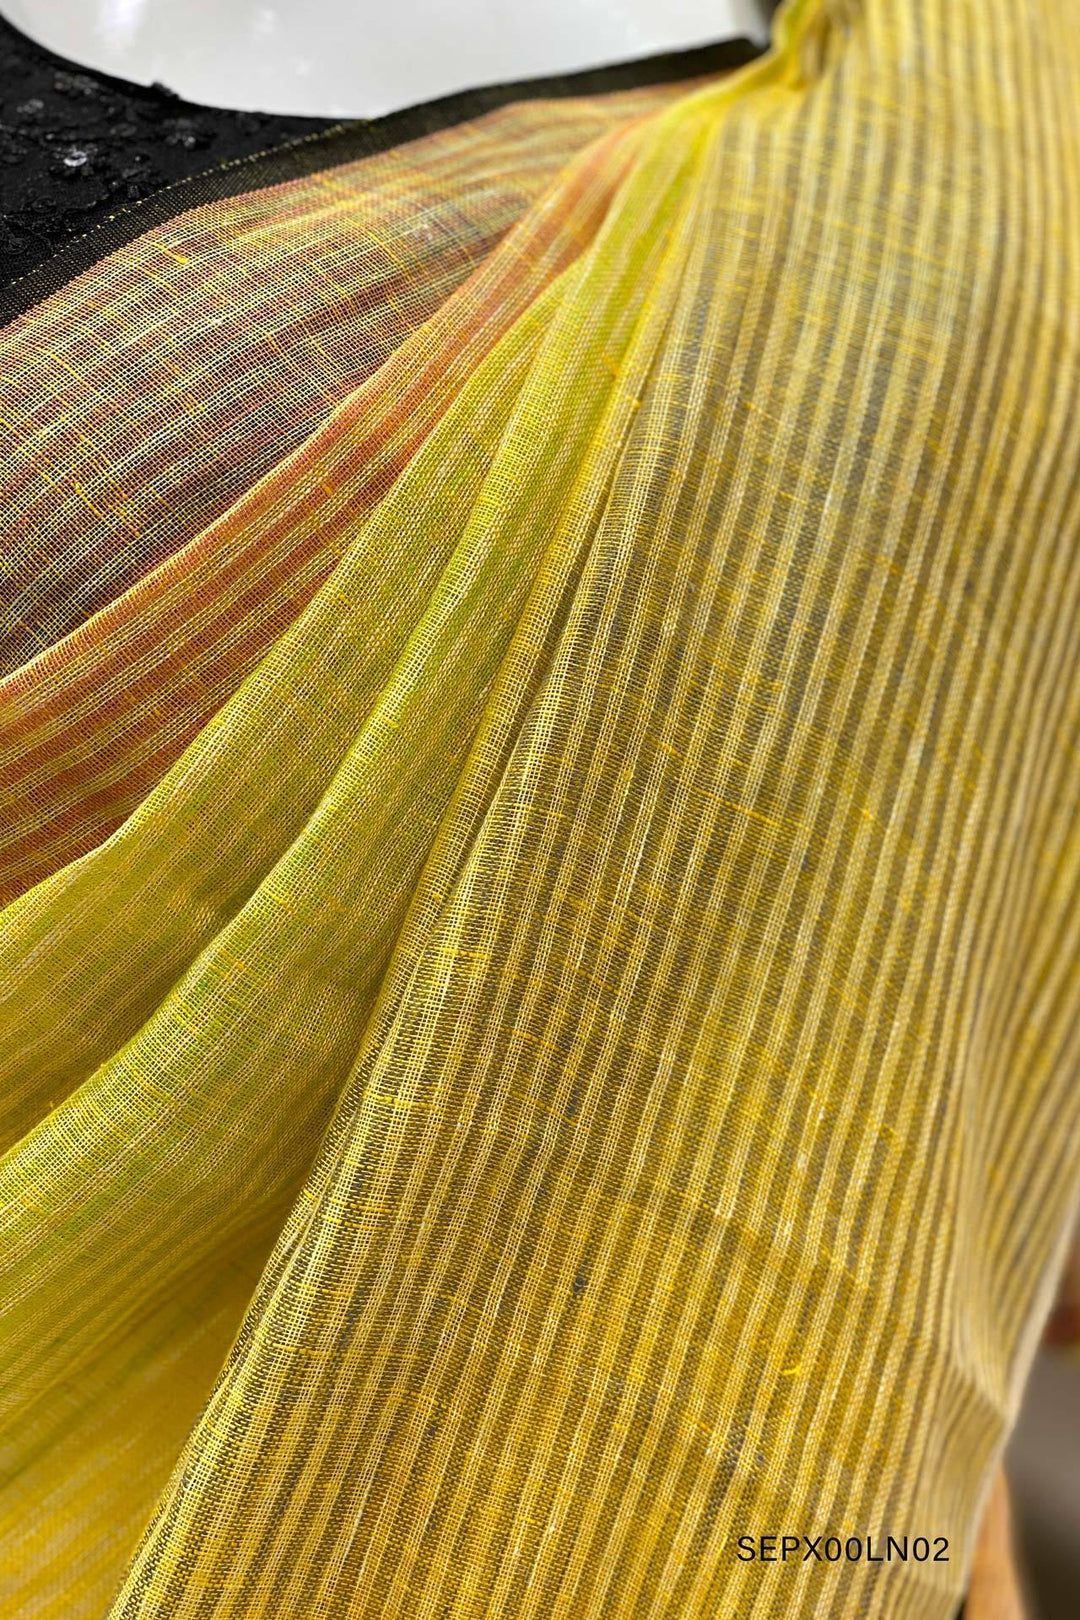 Shades of Yellow Striped Patterned Linen Saree - View 5